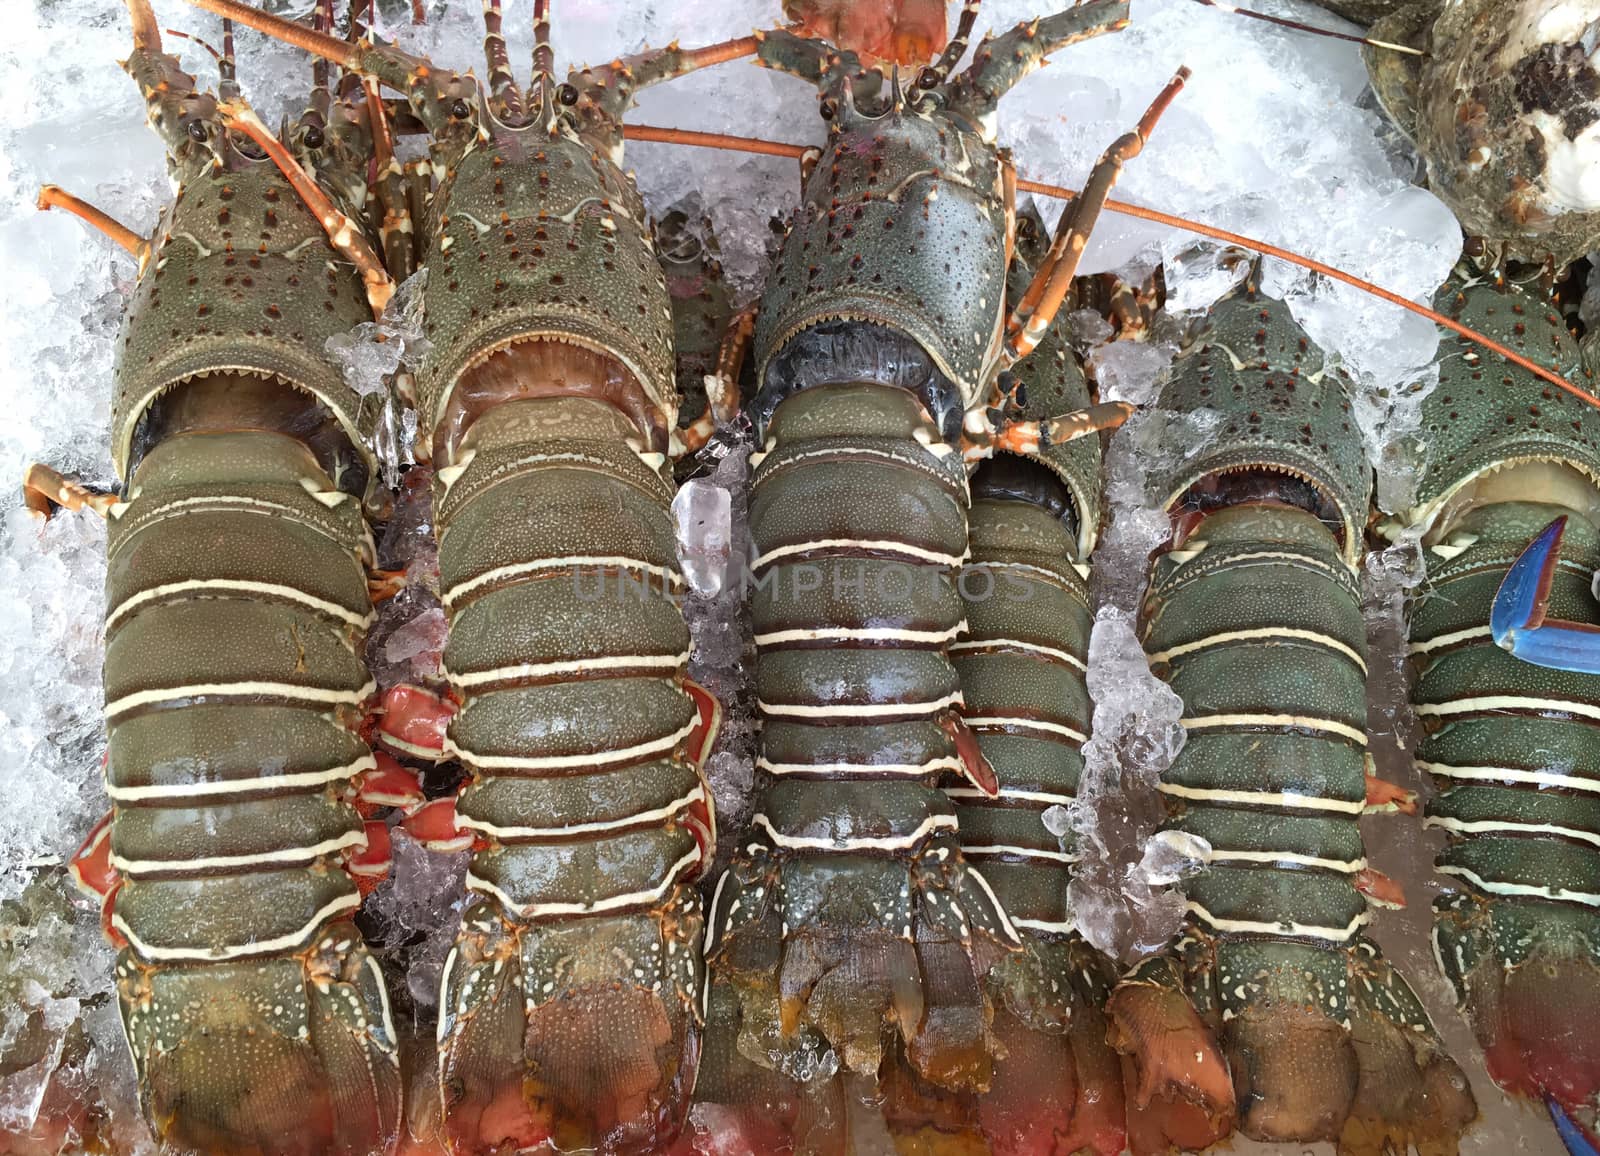 Fresh lobsters on the ice for sale at restaurants or market seafood closeup.